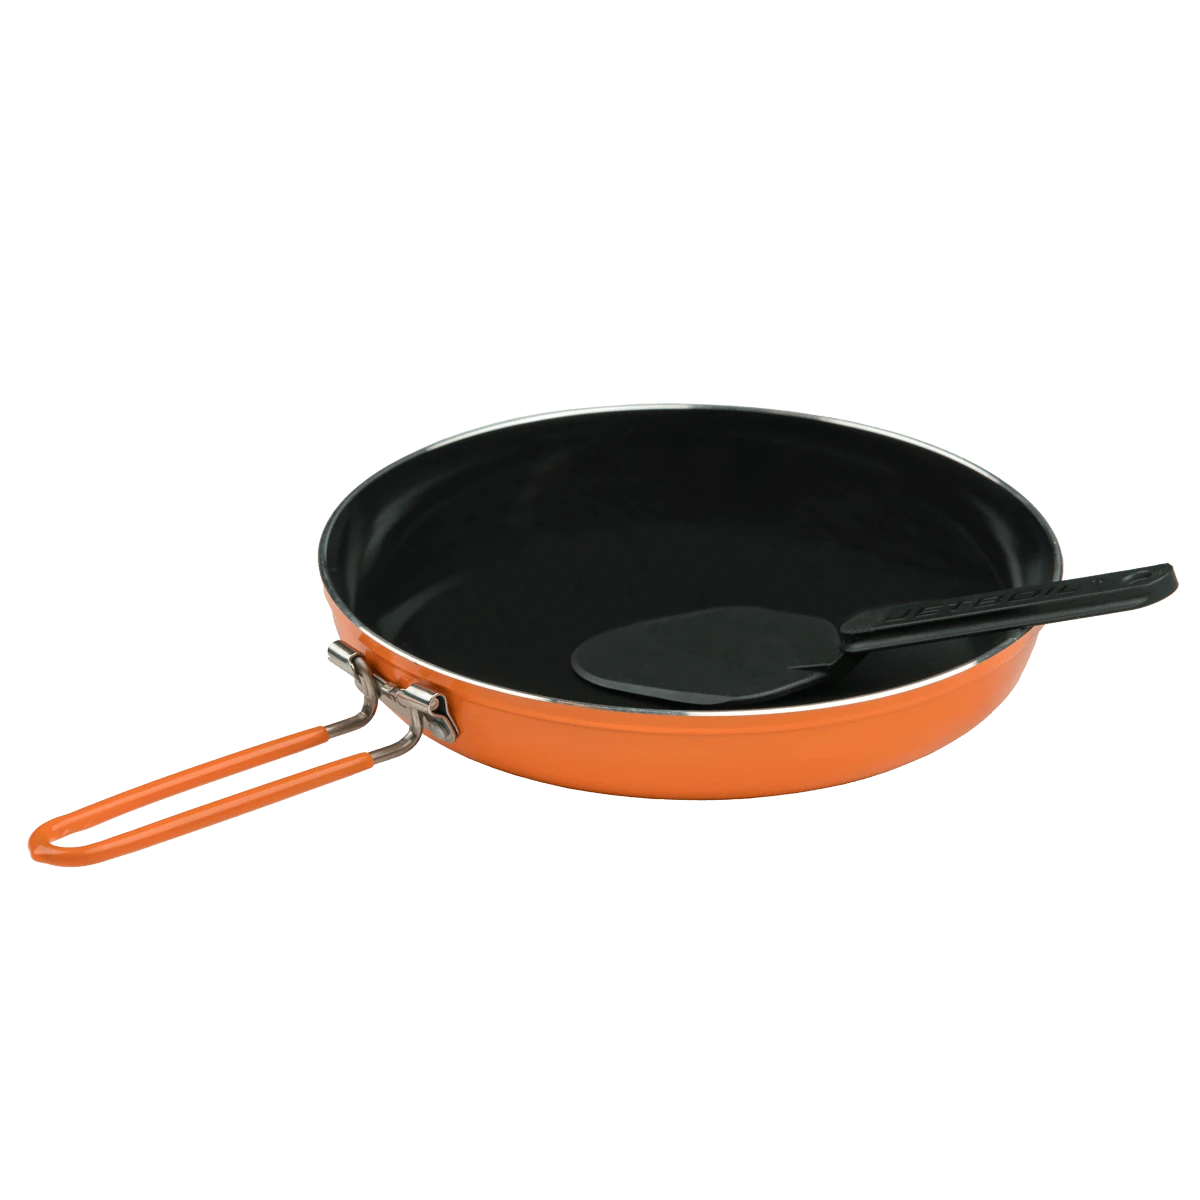 Summit Skillet shown with turner